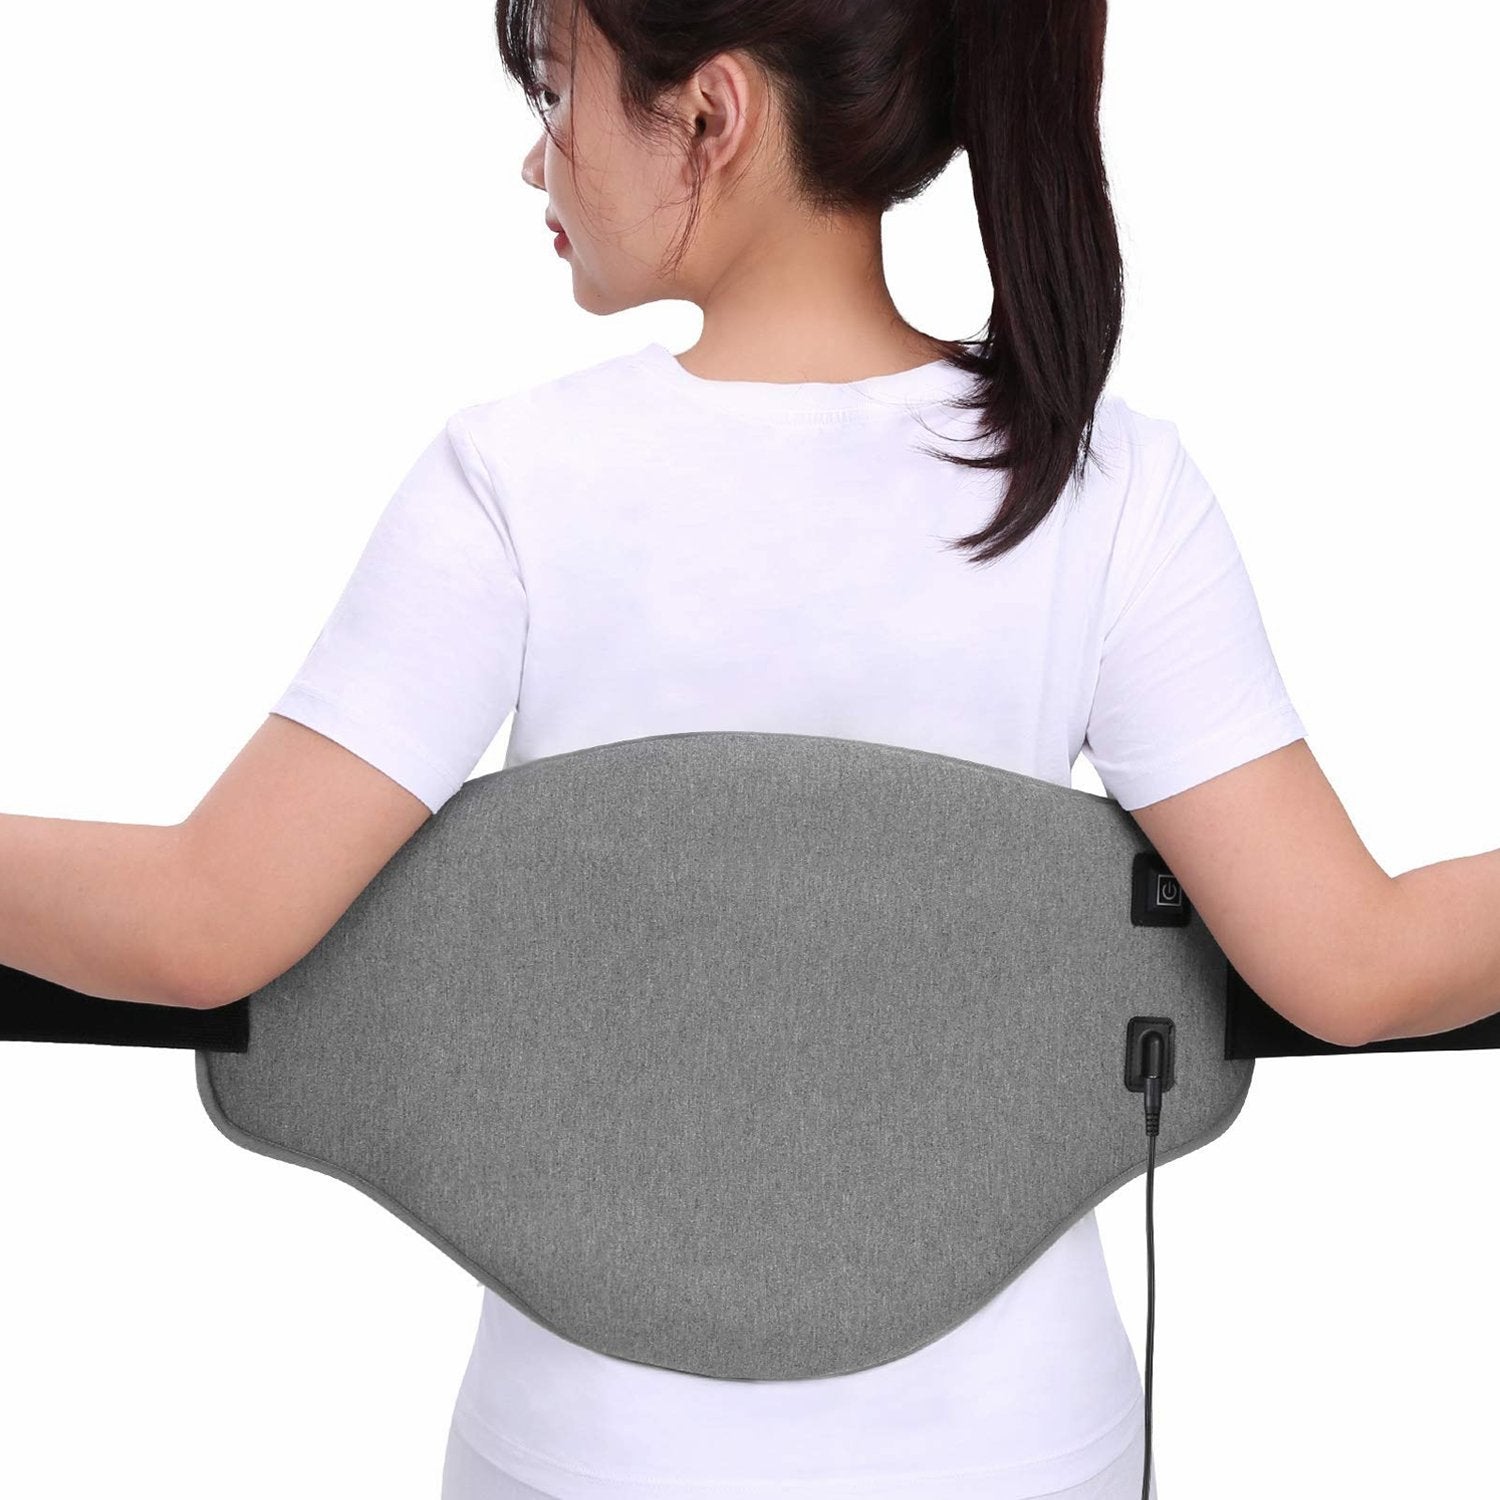 Load image into Gallery viewer, Electric Heating Pad for Lower Back &amp; Shoulder &amp; Abdomen, Large Waist Wrap Belt with Adjustable Flexible Straps, Portable Heating Pad Wraps 3 Heat Settings &amp; 2 Hours Auto Off, Washable, 32 x 54 cm - NAIPO
